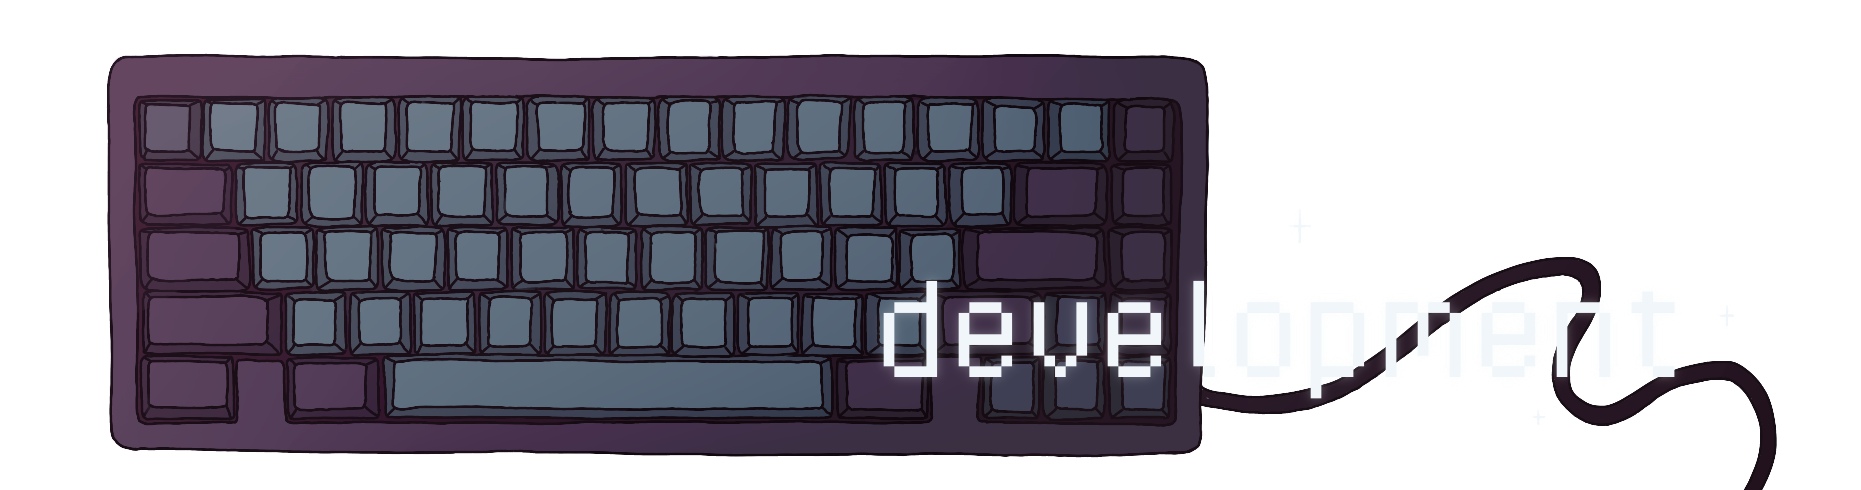 100 Games Development Header. There is a keyboard visible in the picture